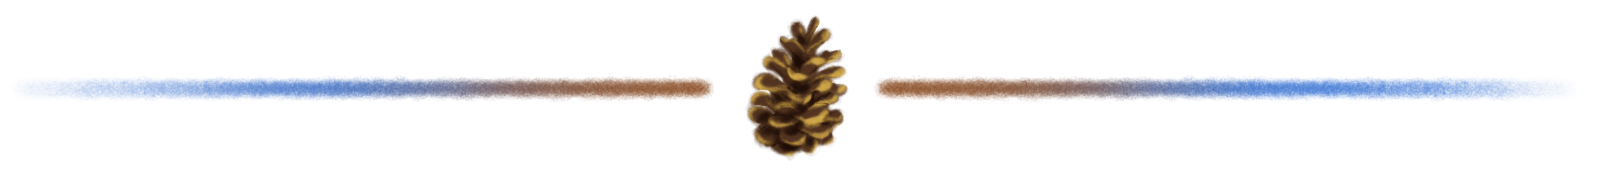 Illustration of pinecone used to divide story text